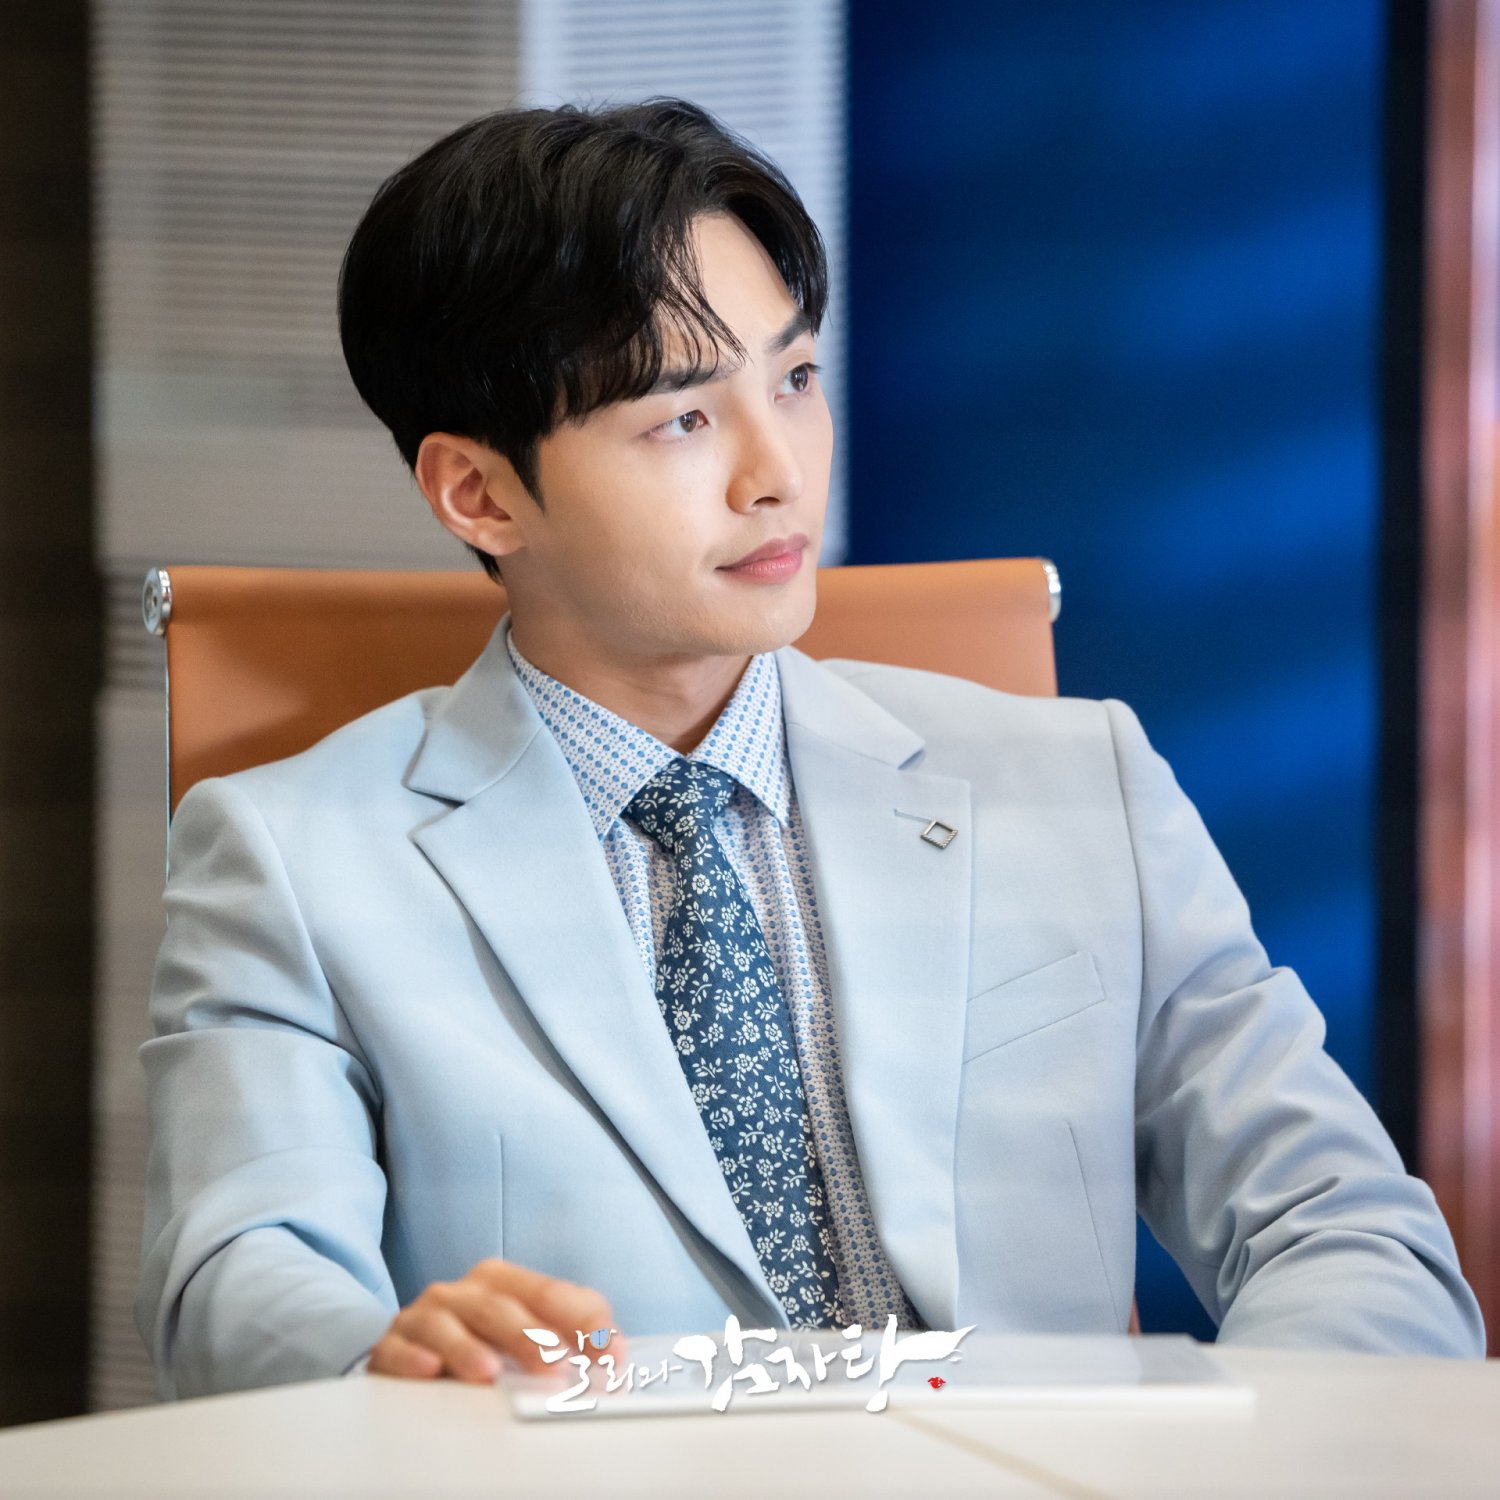 [Photos] New Stills Added for the Korean Drama 'Dali and Cocky Prince ...